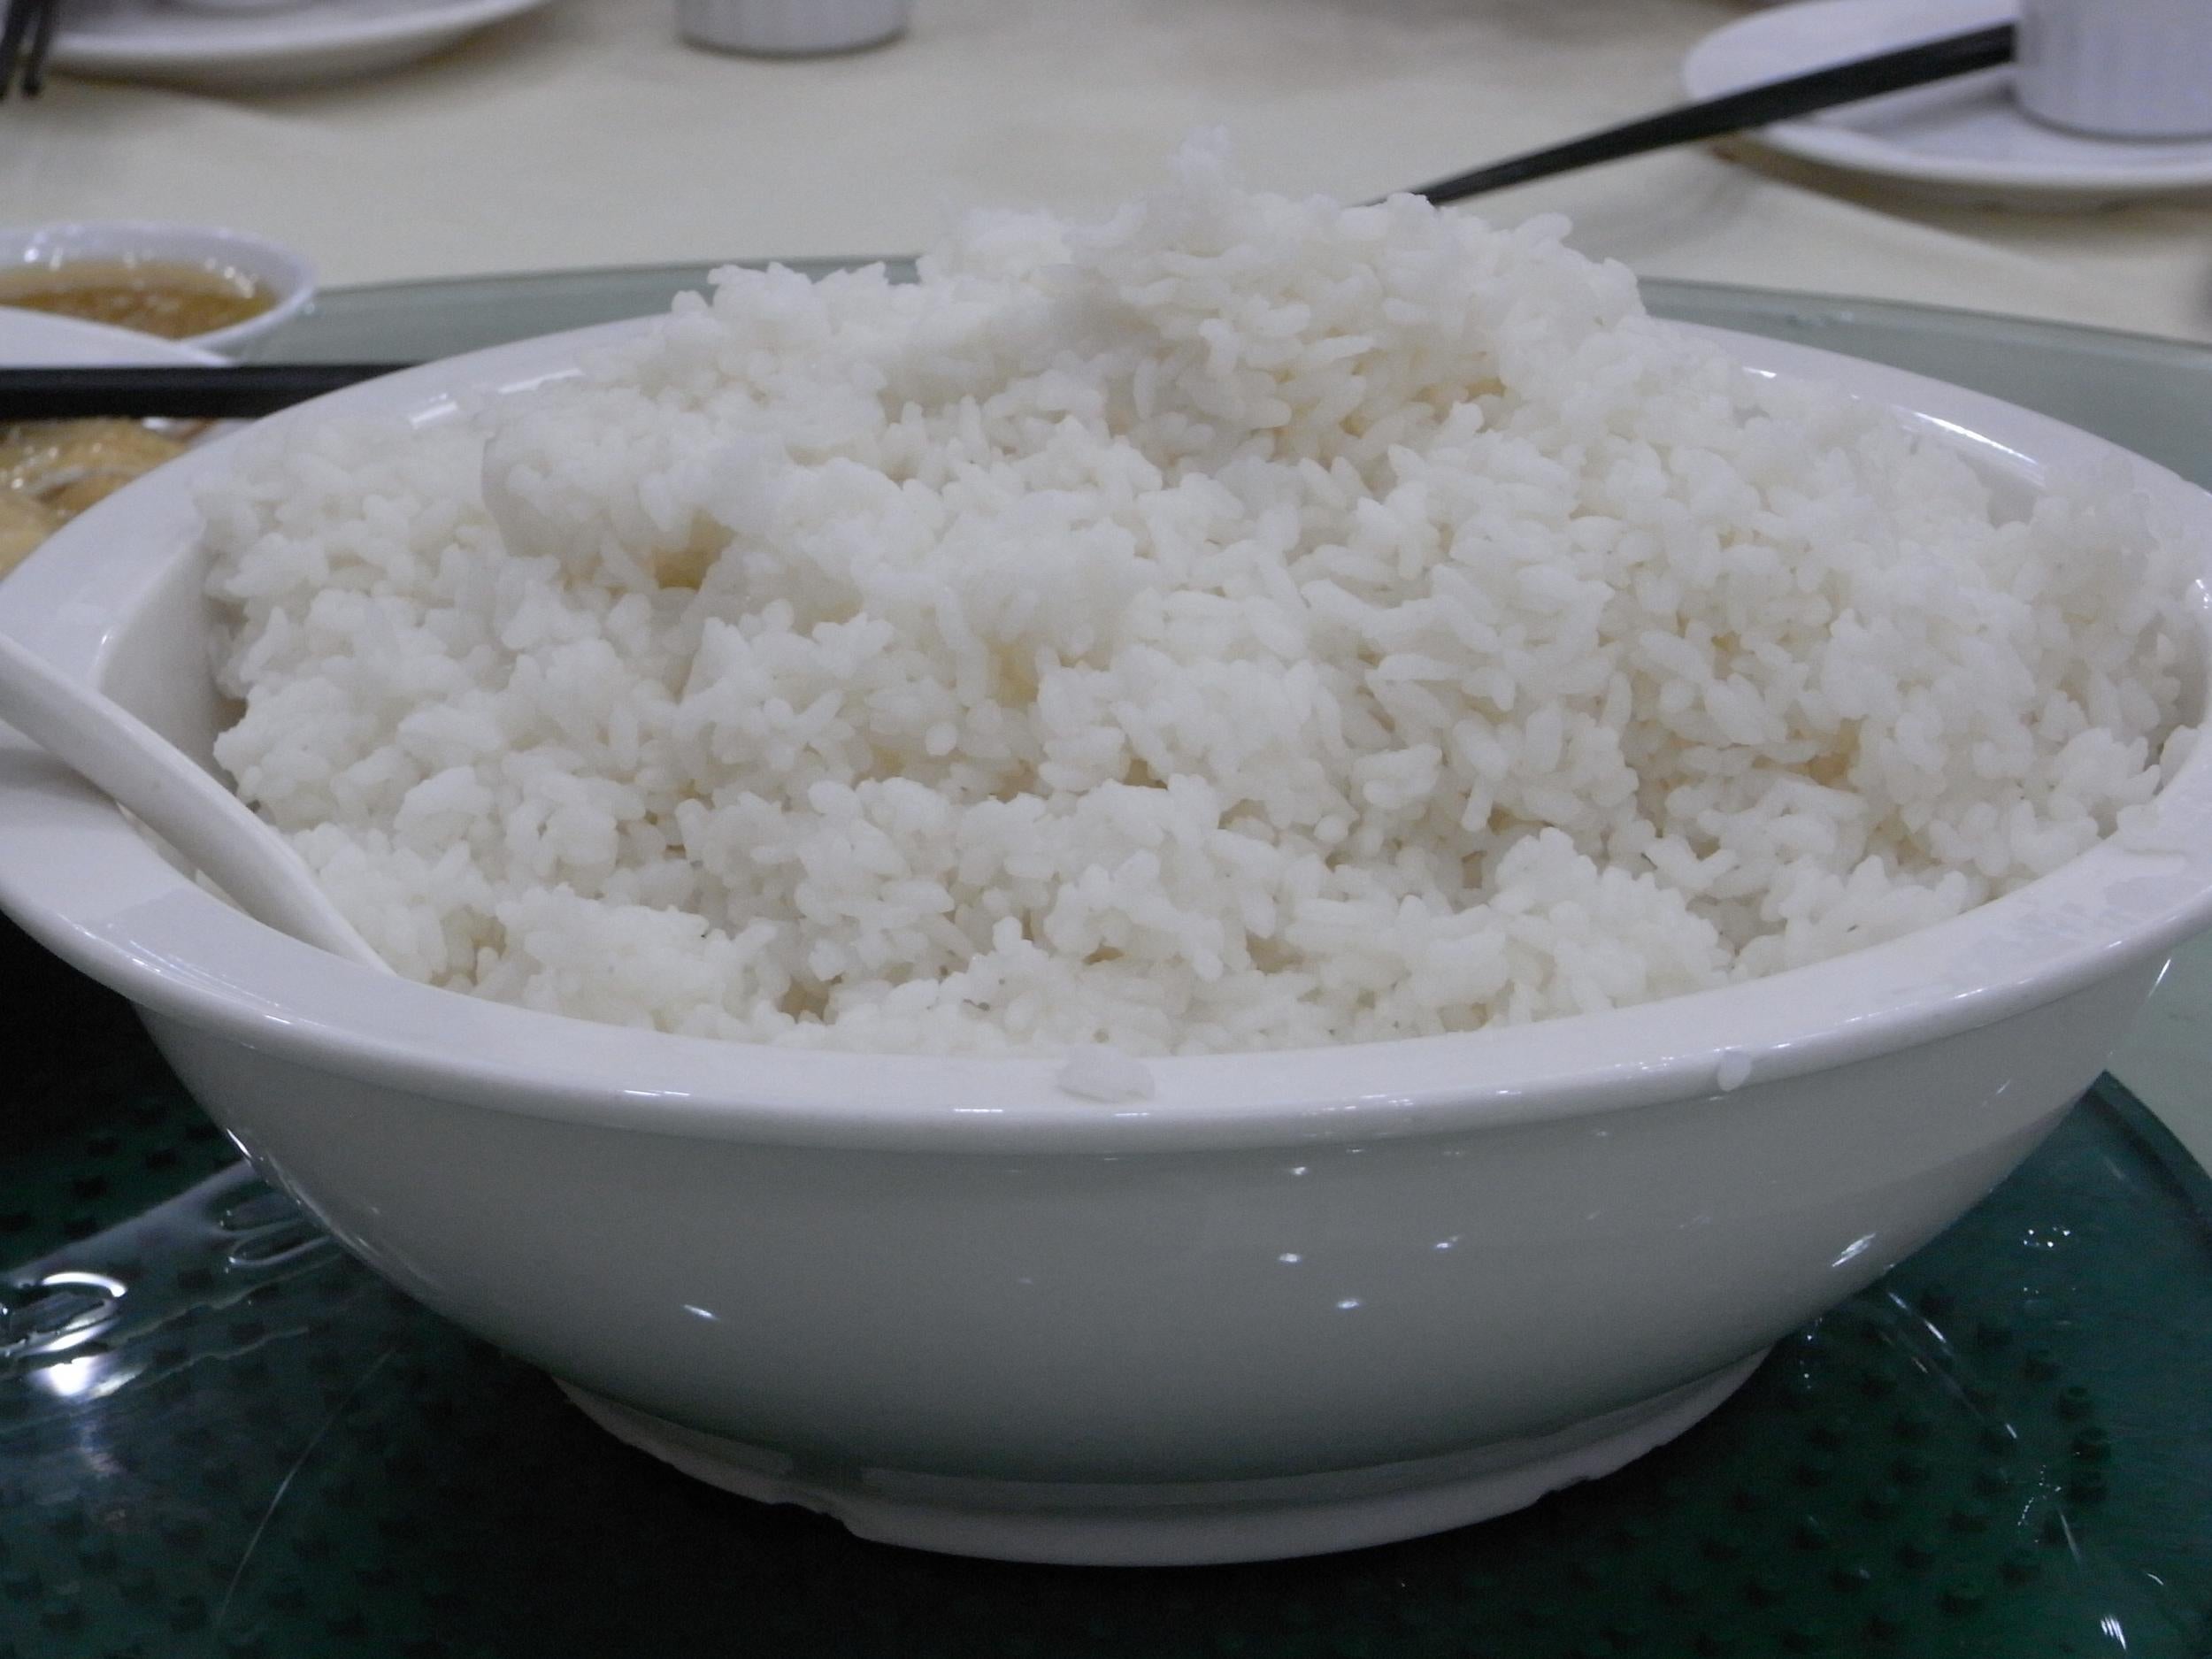 White rice, when left to cool, develops properties which make it healthier